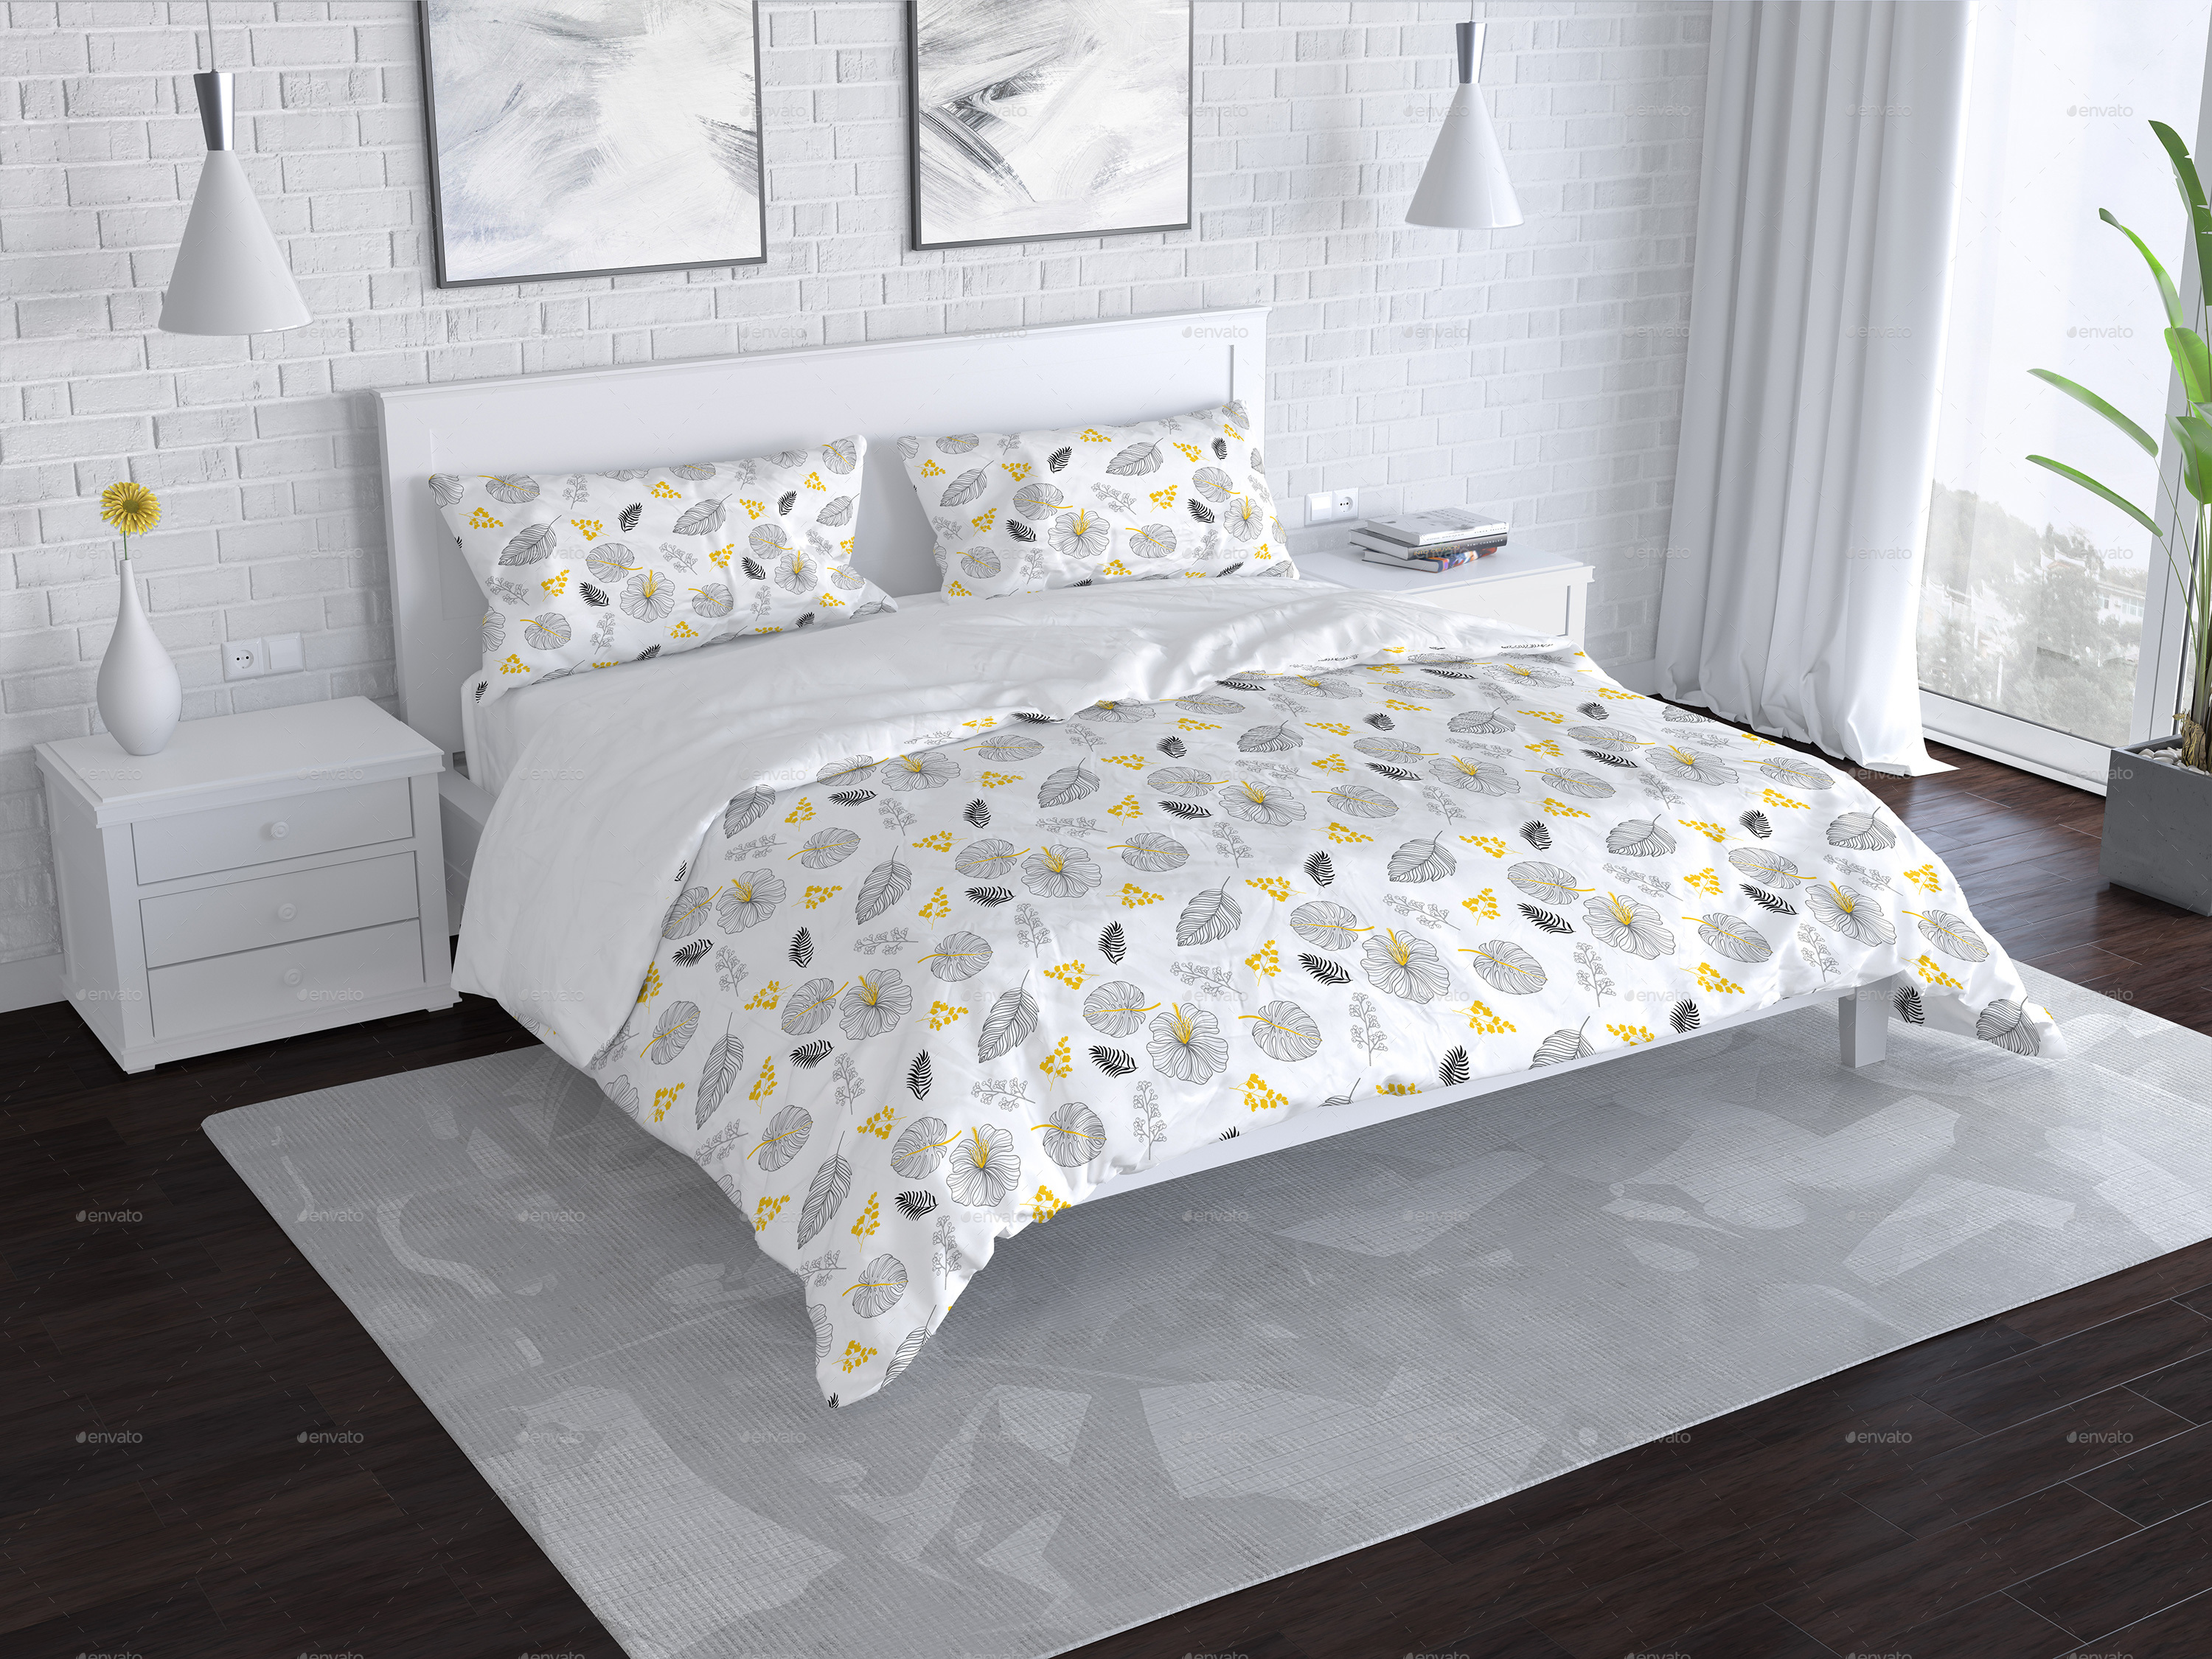 Download Bedroom and Bed Linen Mockup by 7Lights | GraphicRiver